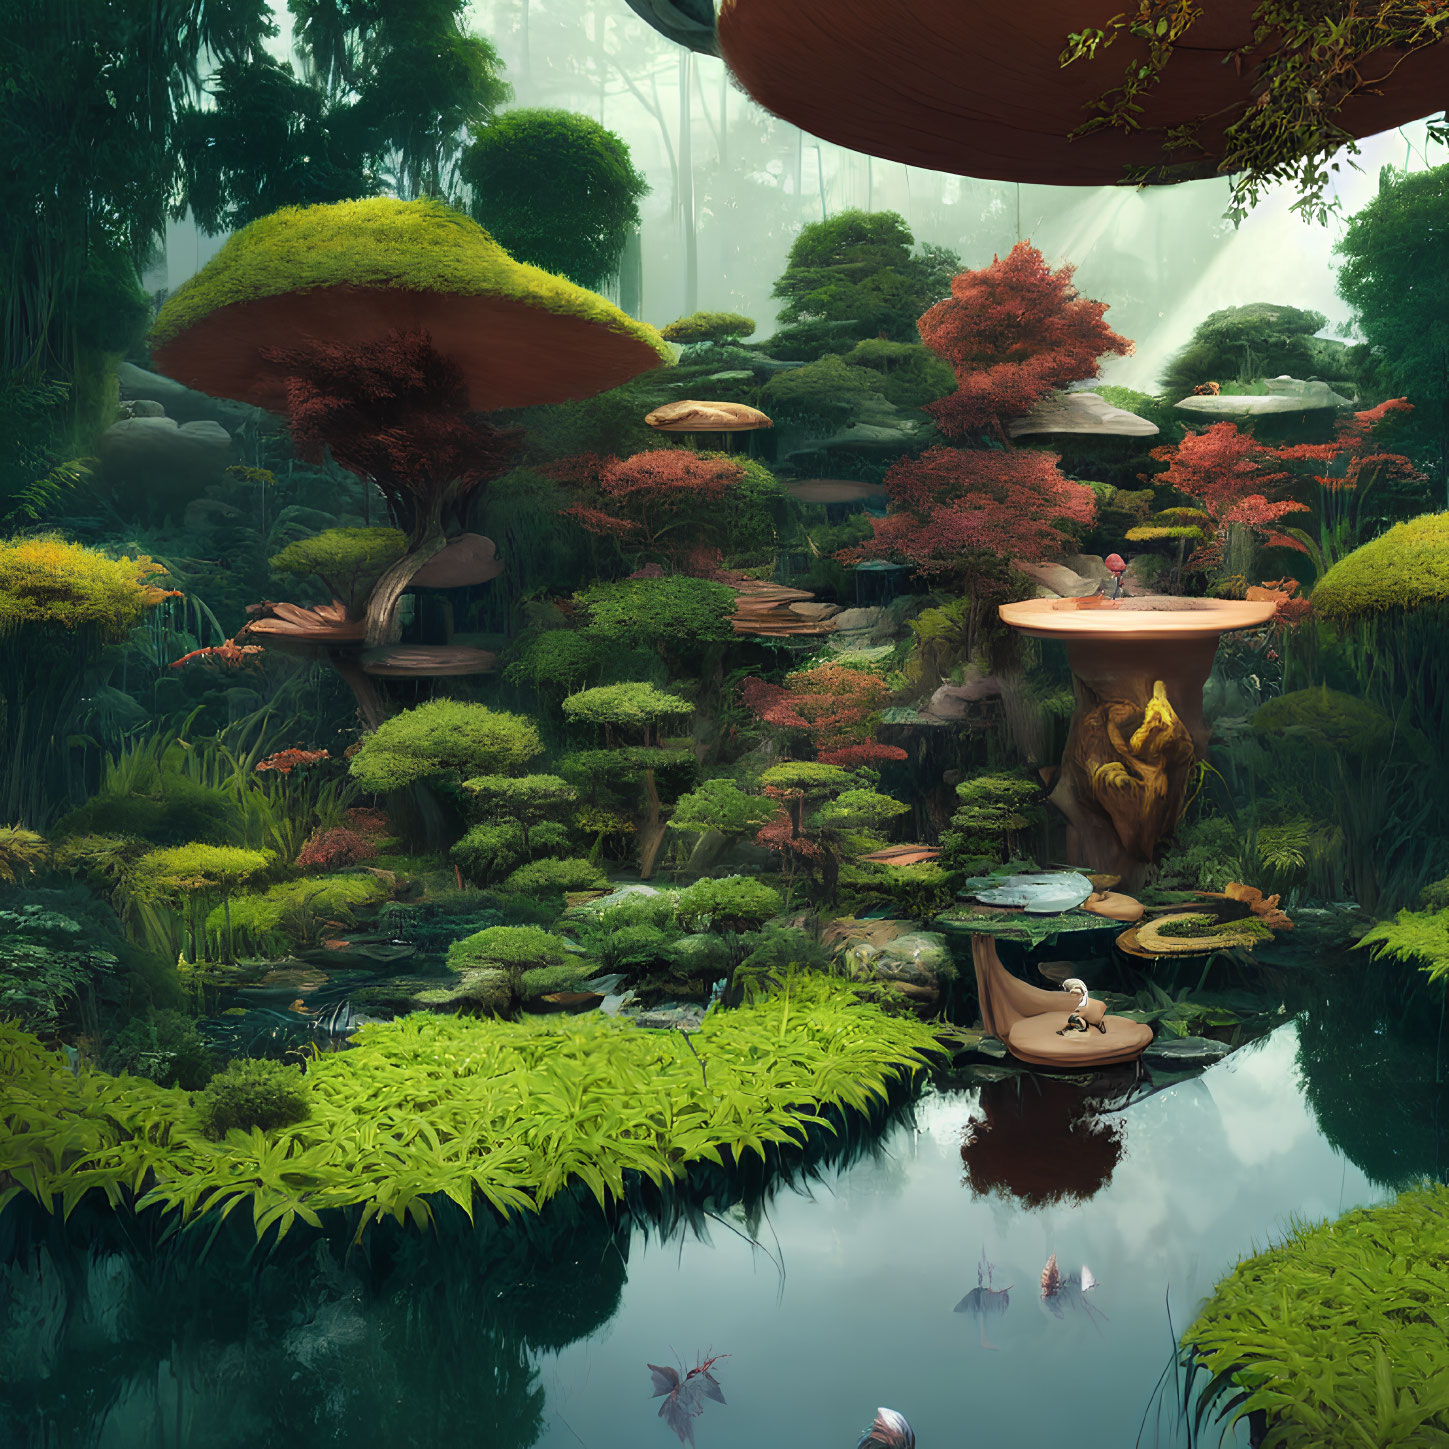 Mystical forest with red trees, oversized mushrooms, and reflecting pond